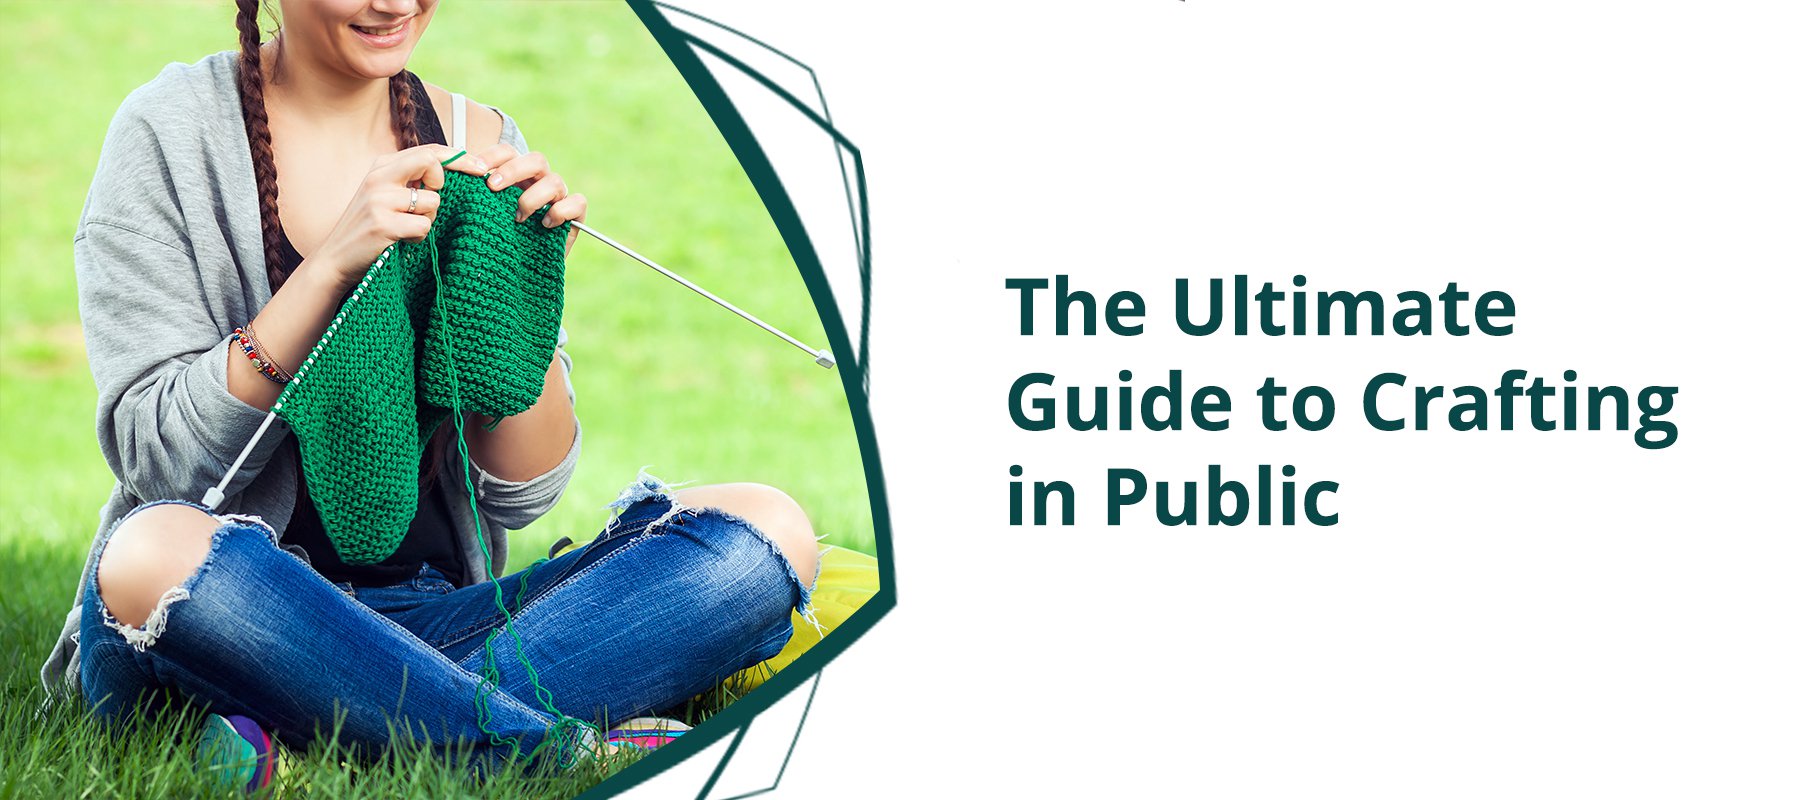 The Ultimate Guide to Crafting in Public